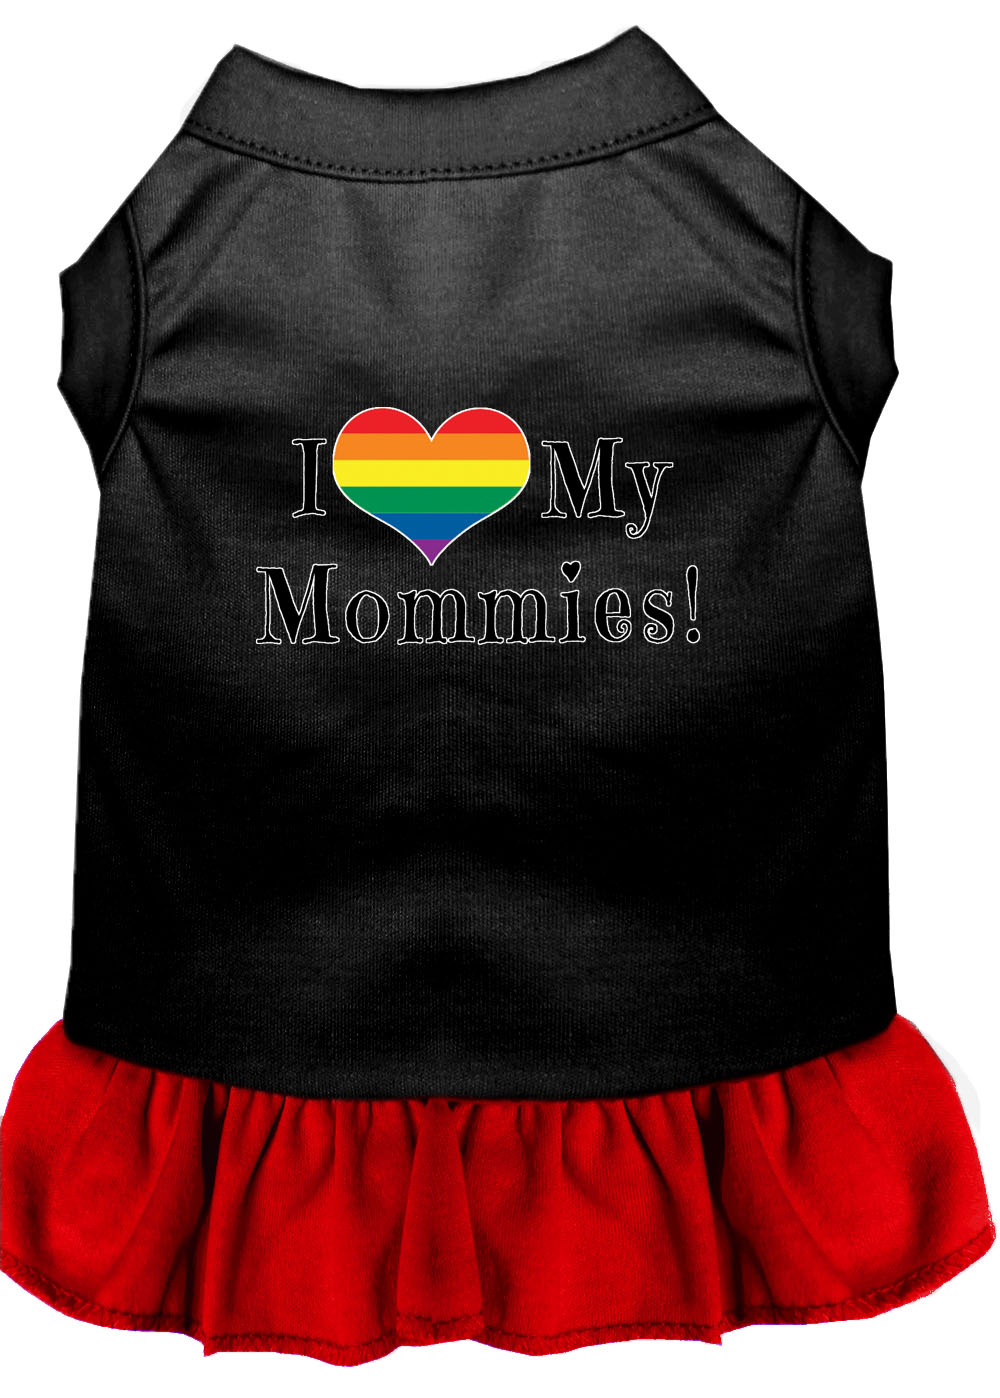 I Heart my Mommies Screen Print Dog Dress Black with Red Lg